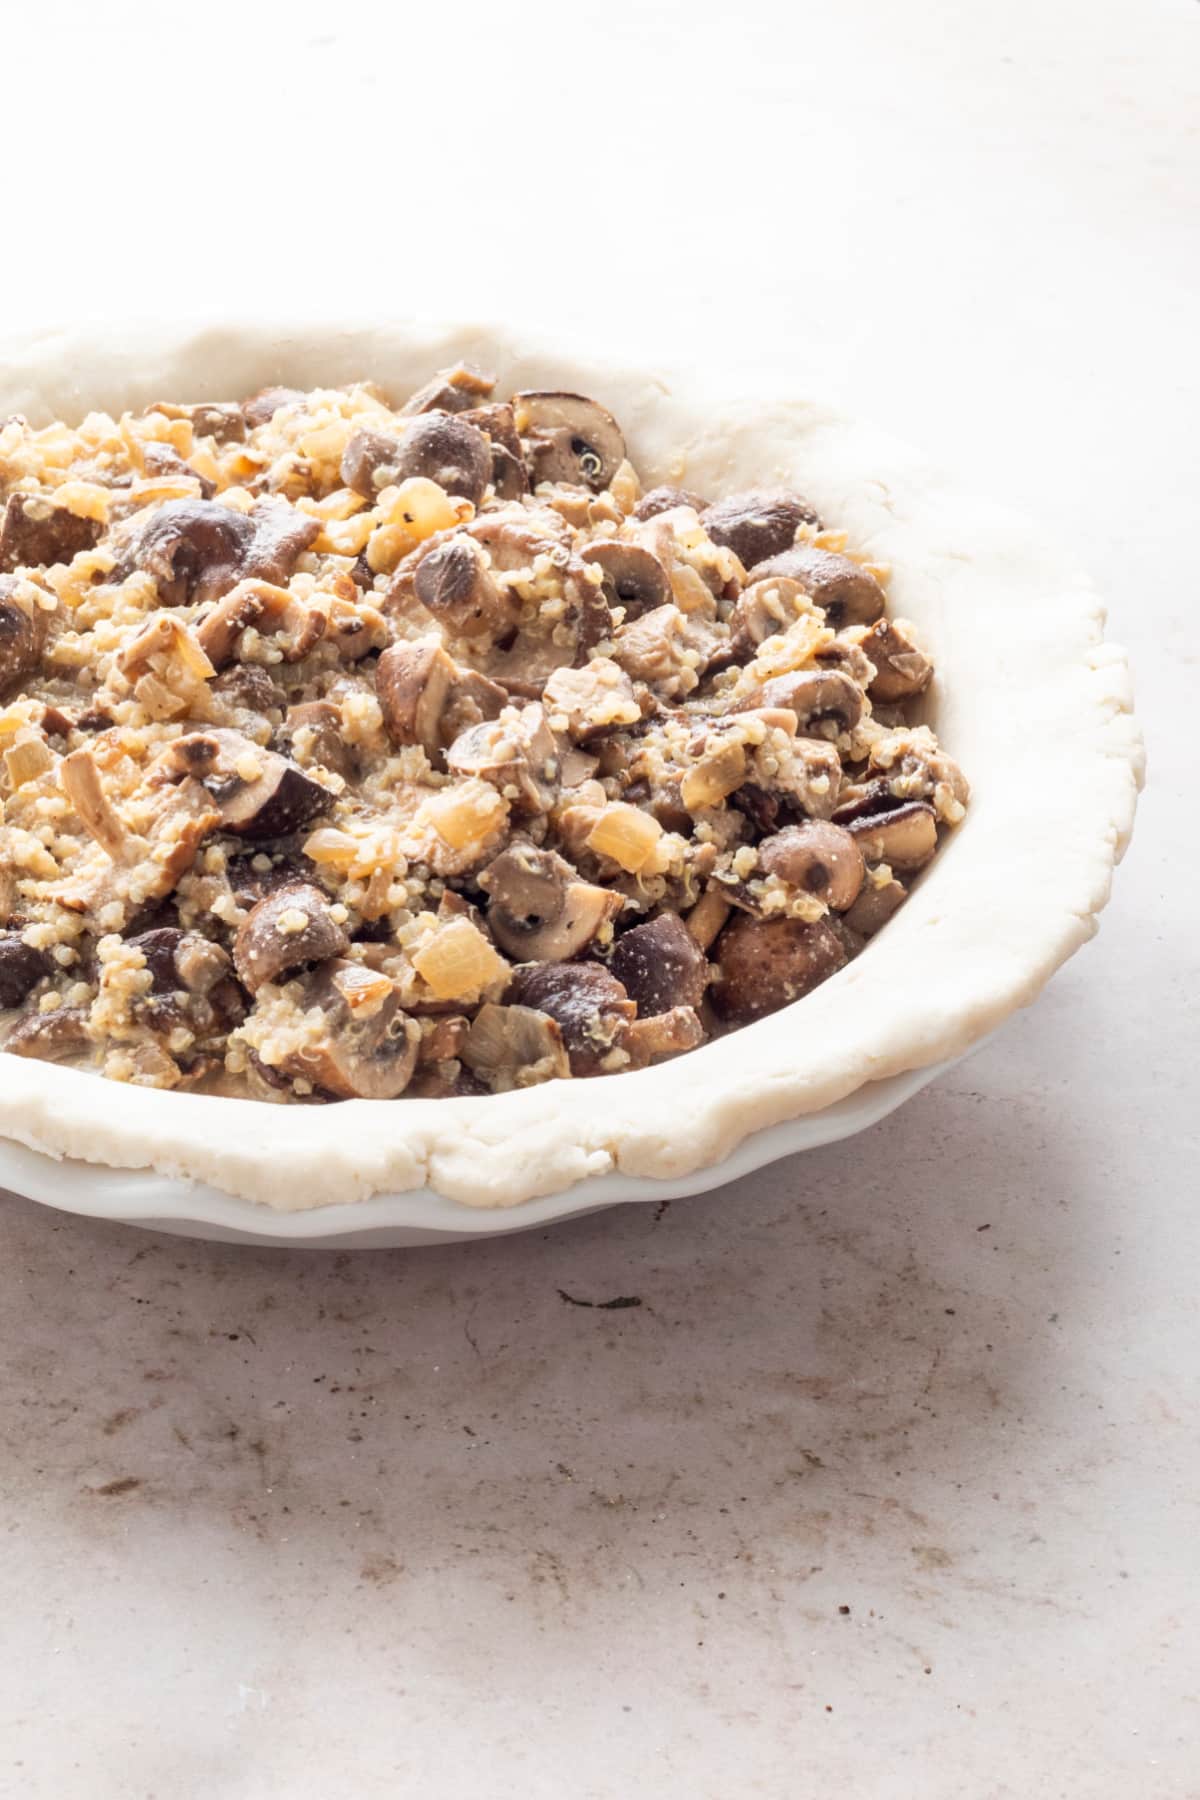 A pie plate lined with a bottom crust and filled with a savory mushroom quinoa filling.